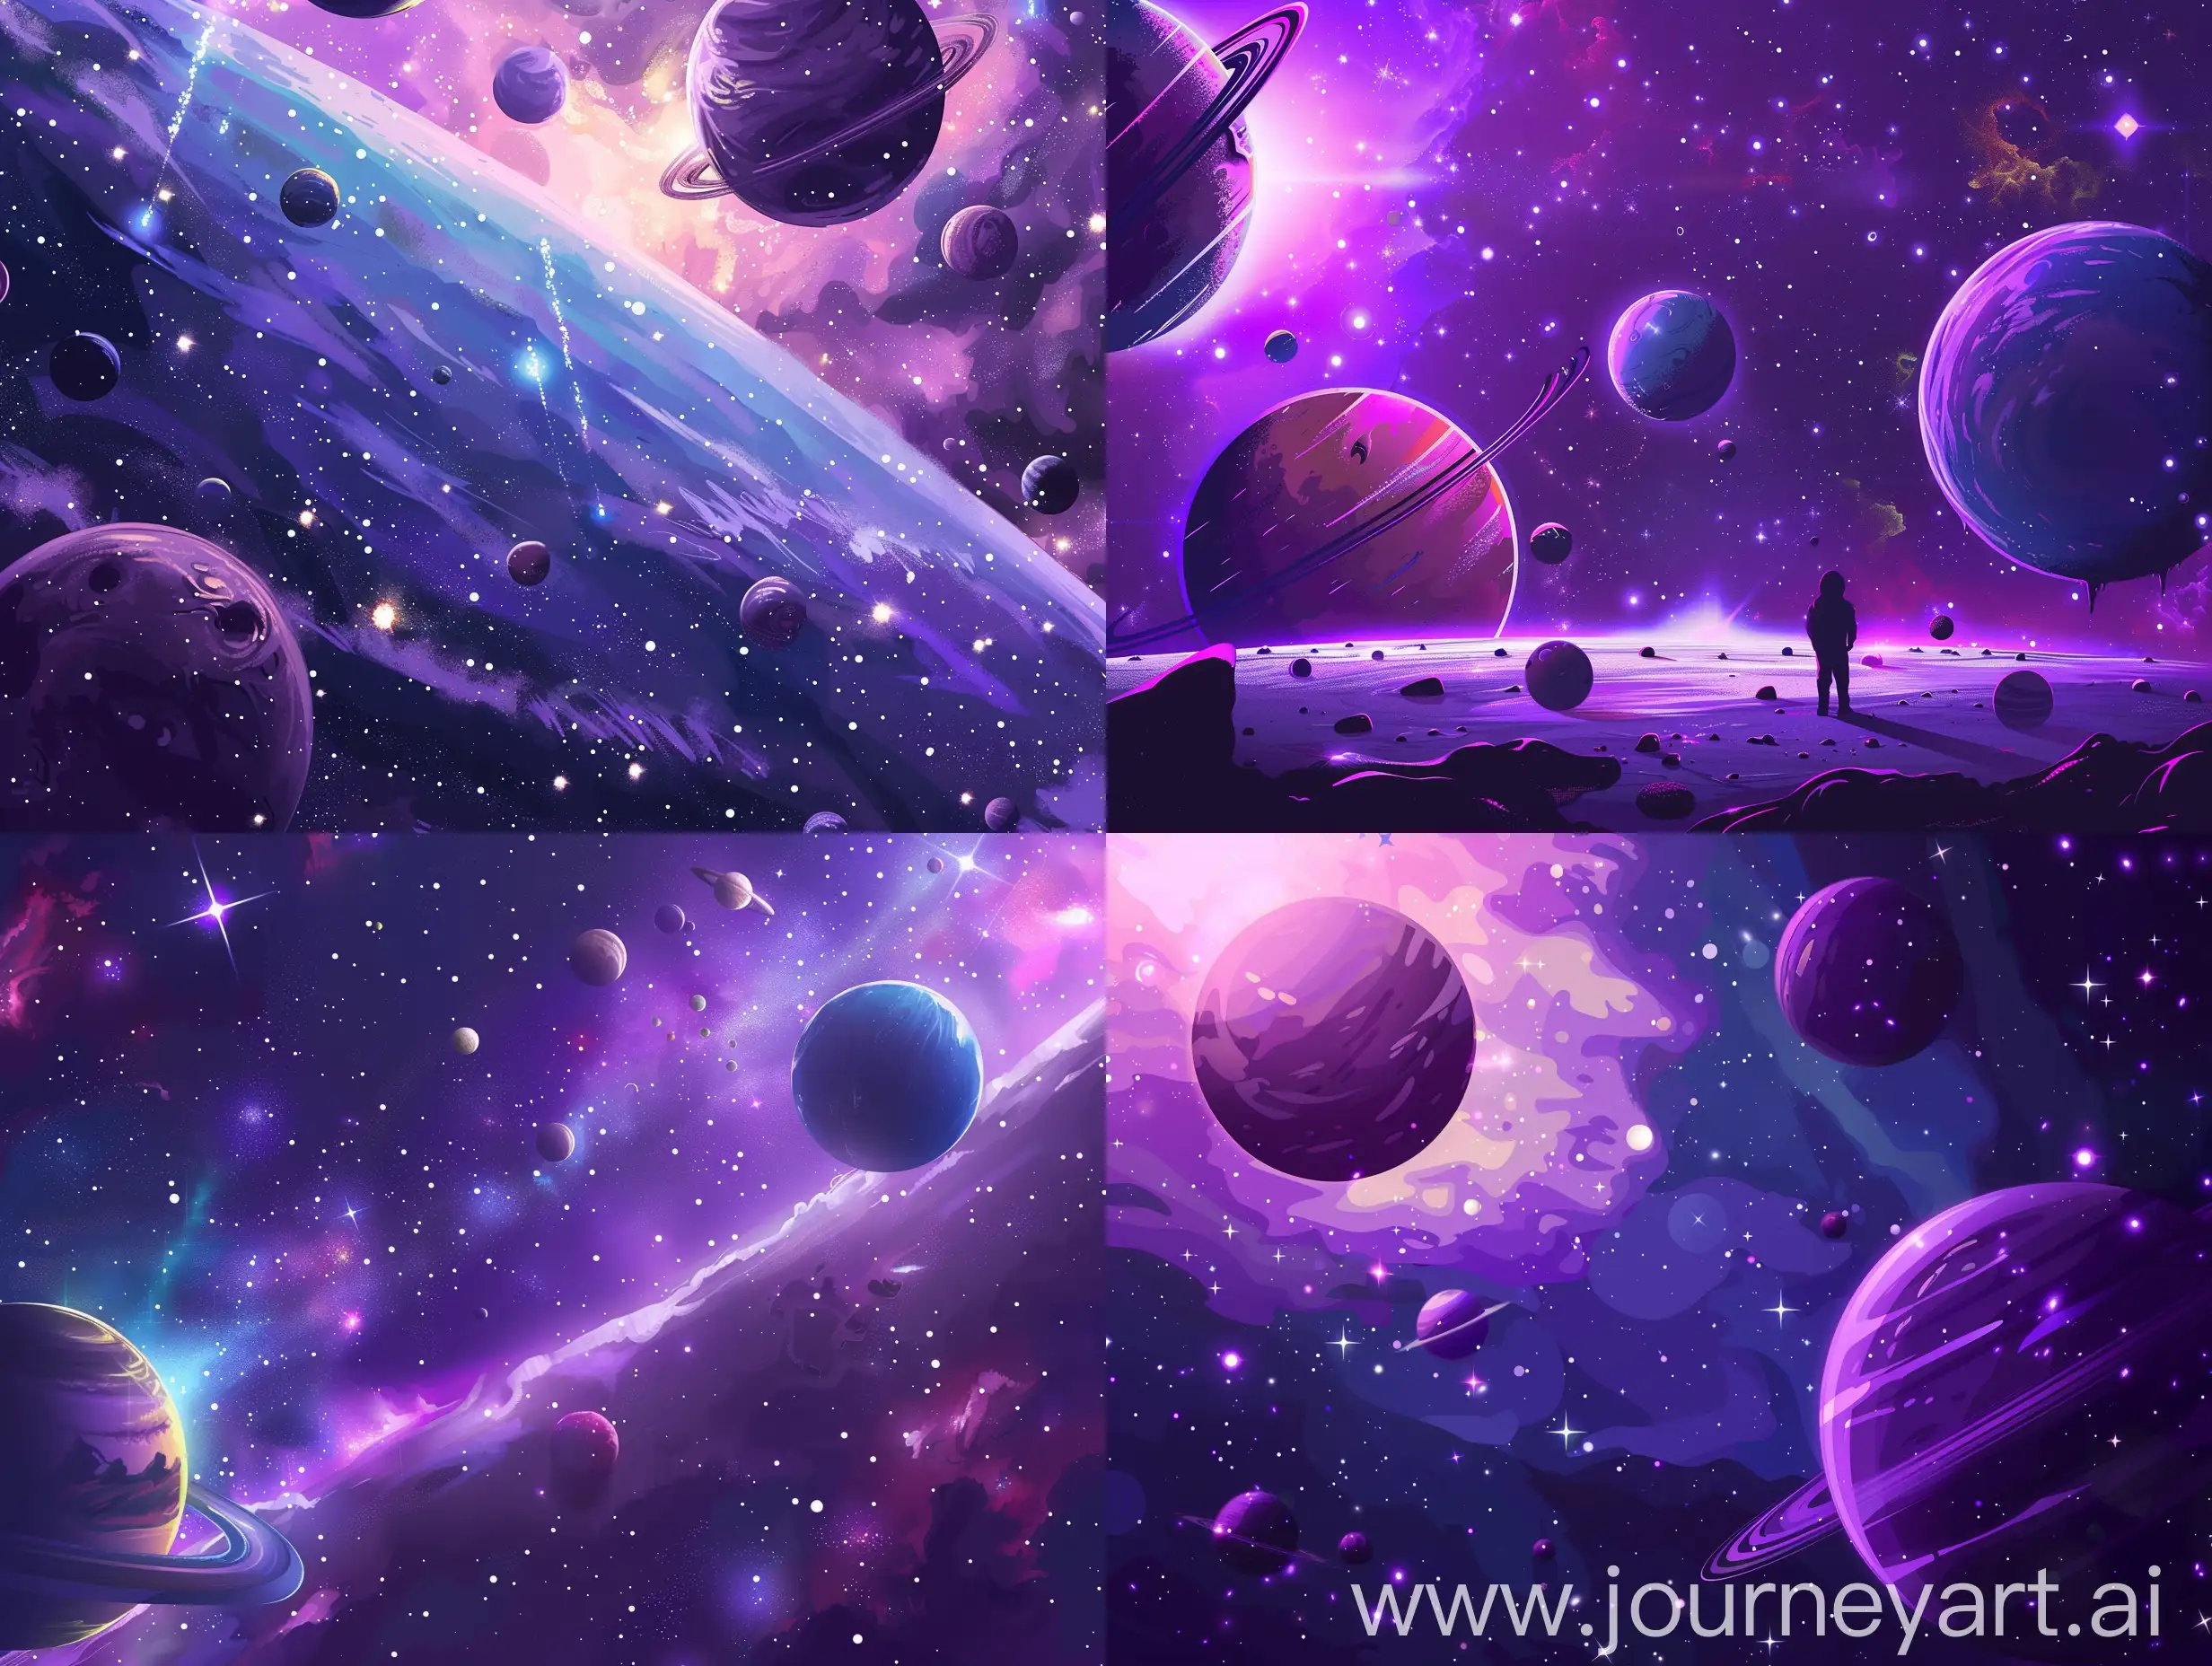 Vibrant-Anime-Style-Universe-with-an-Array-of-Planets